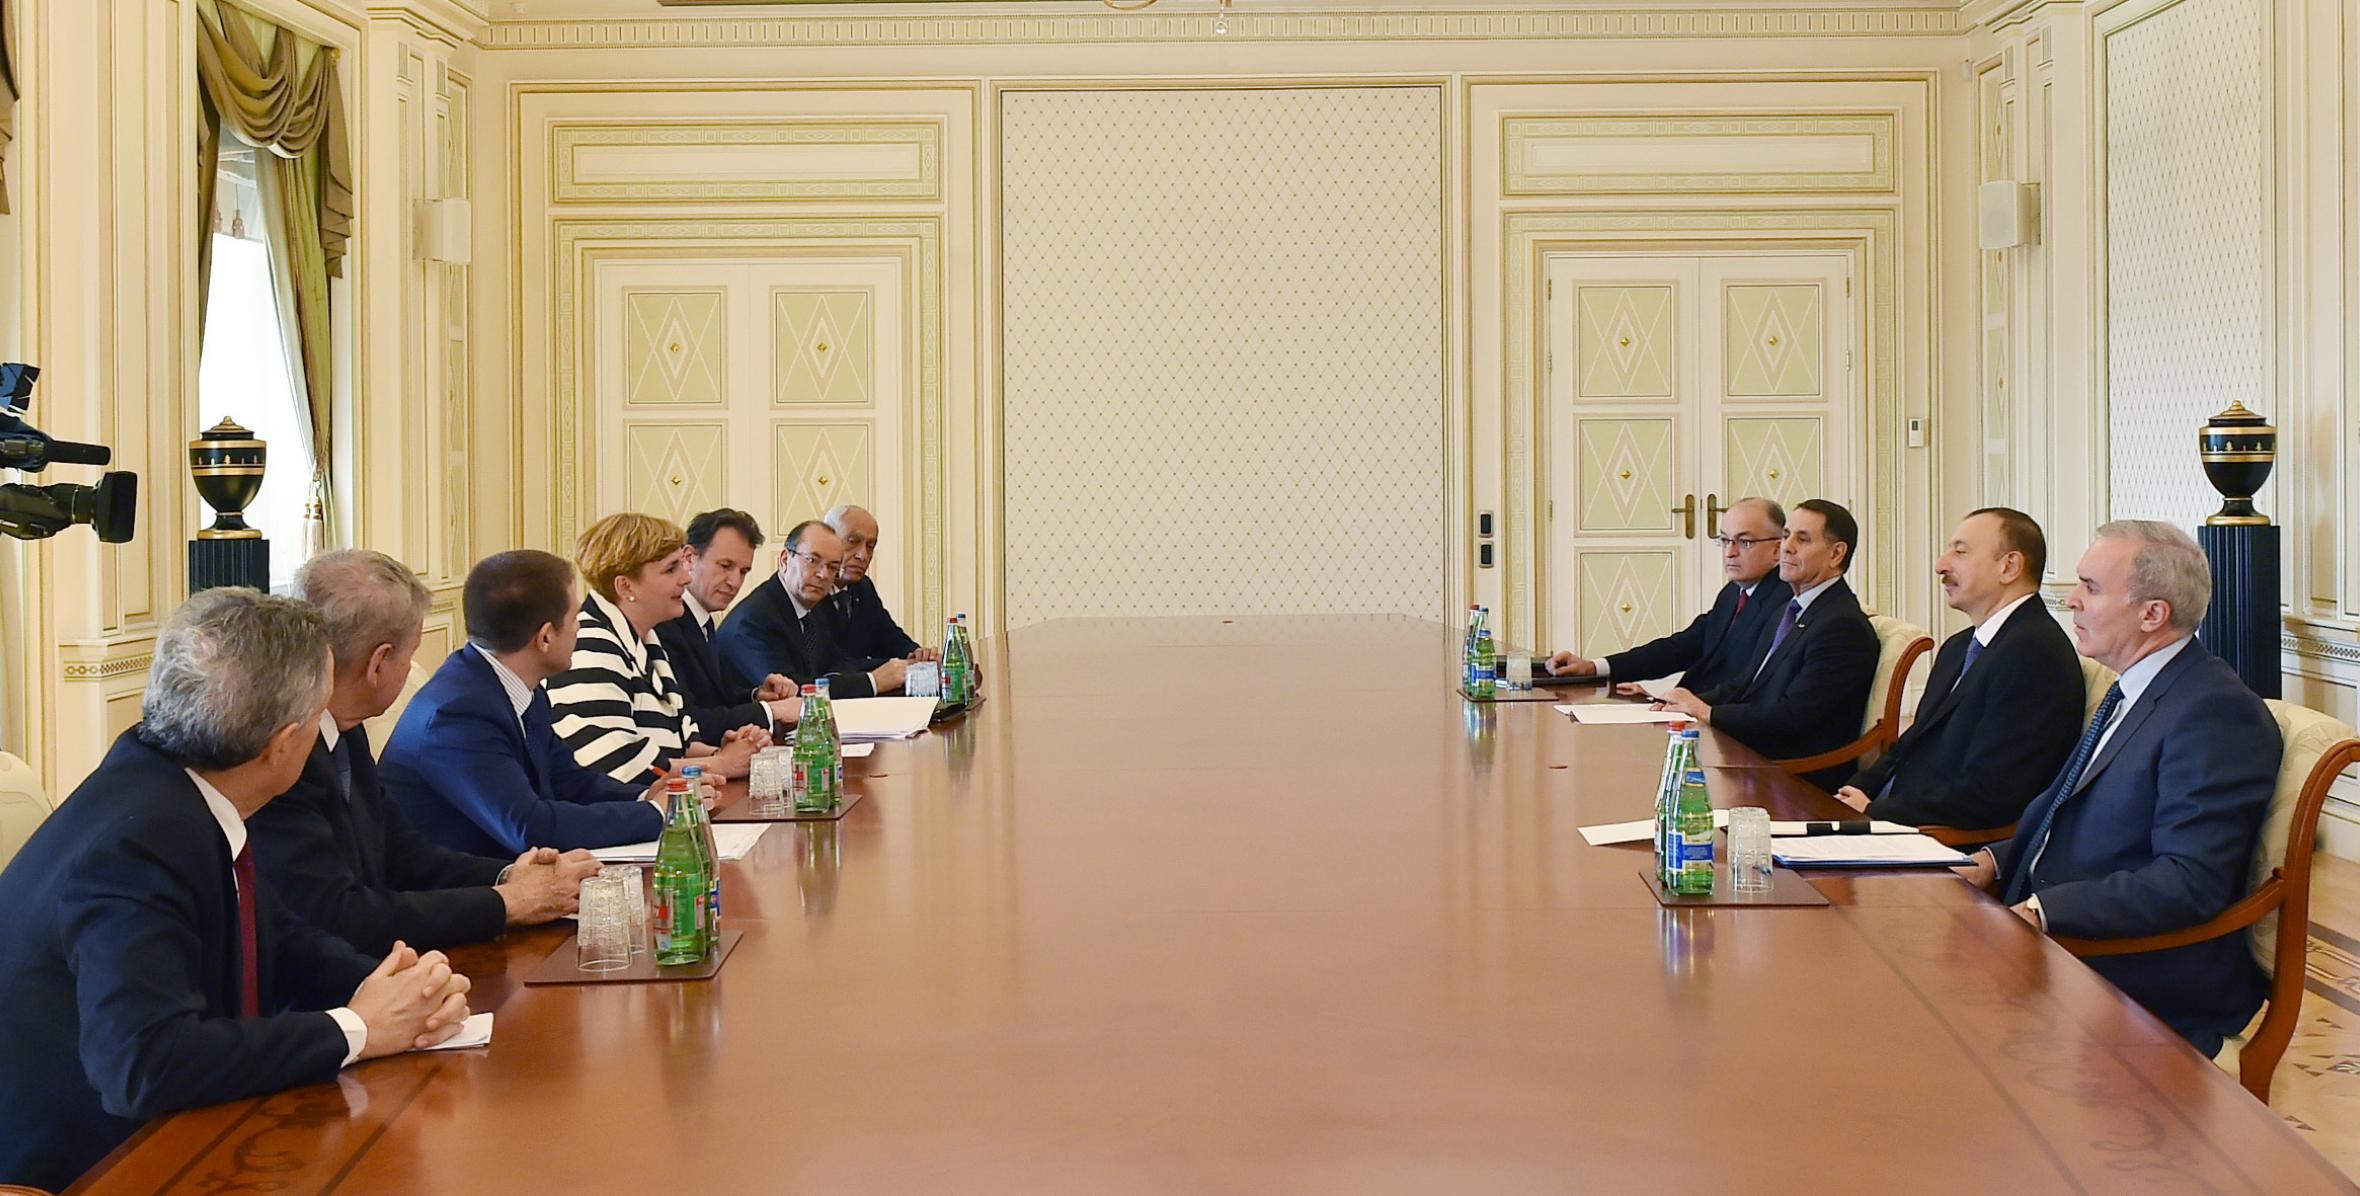 Ilham Aliyev received a delegation led by the Italian Minister of Economic Development